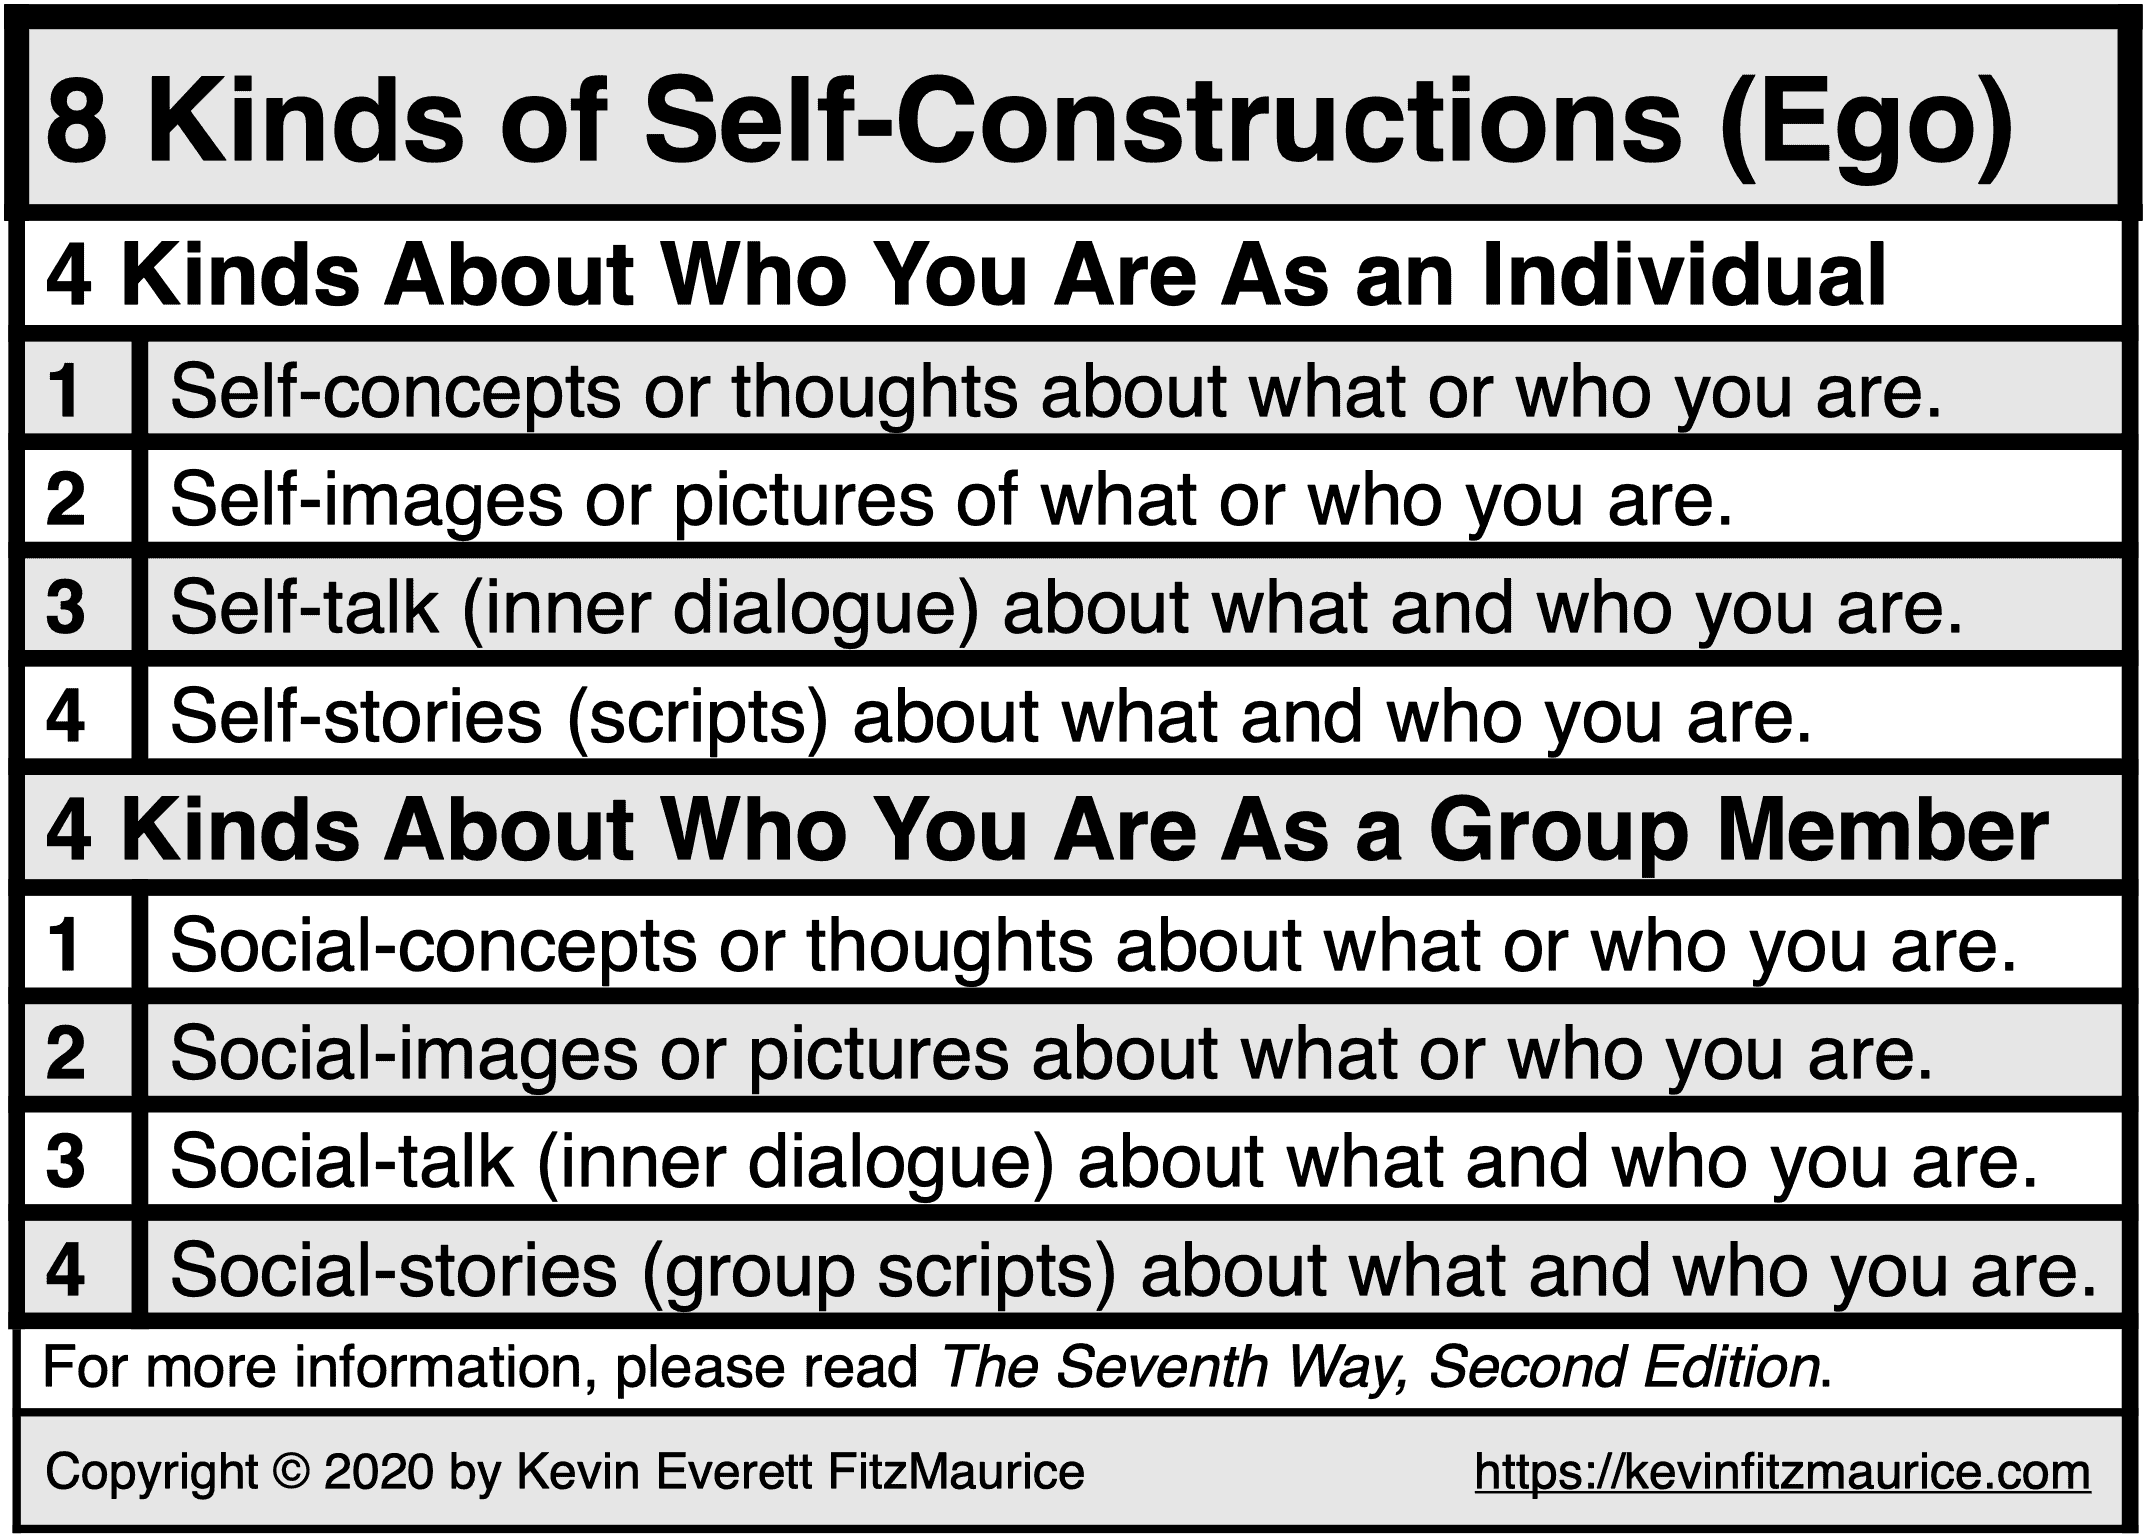 8 Kinds of Self-Constructions